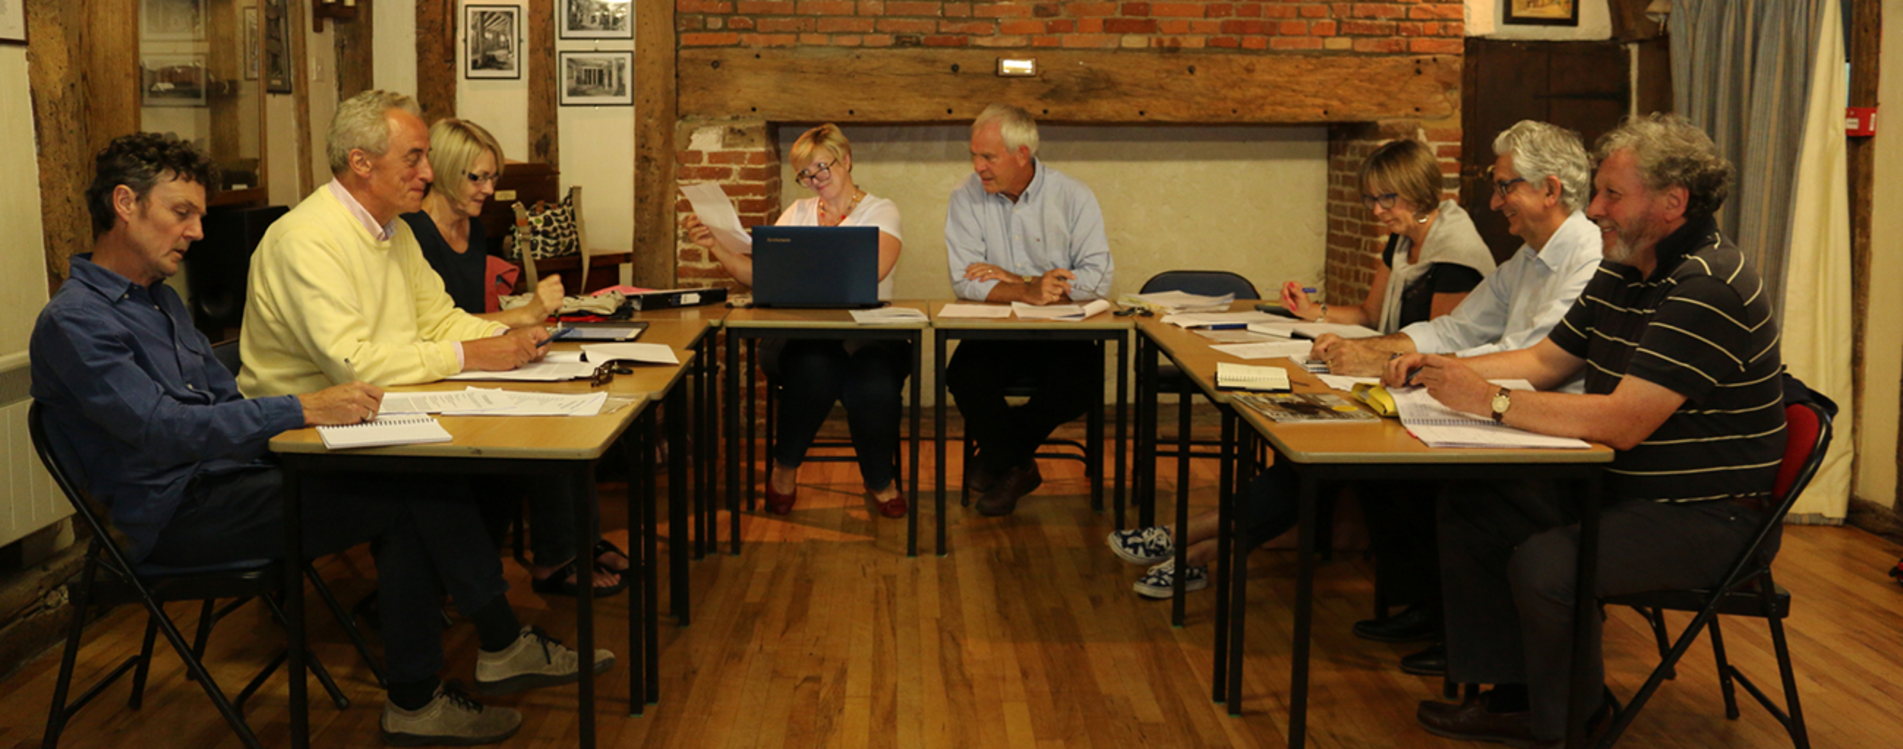 barley-parish-council-at-their-monthly-meeting-in-the-town-house (cropped)